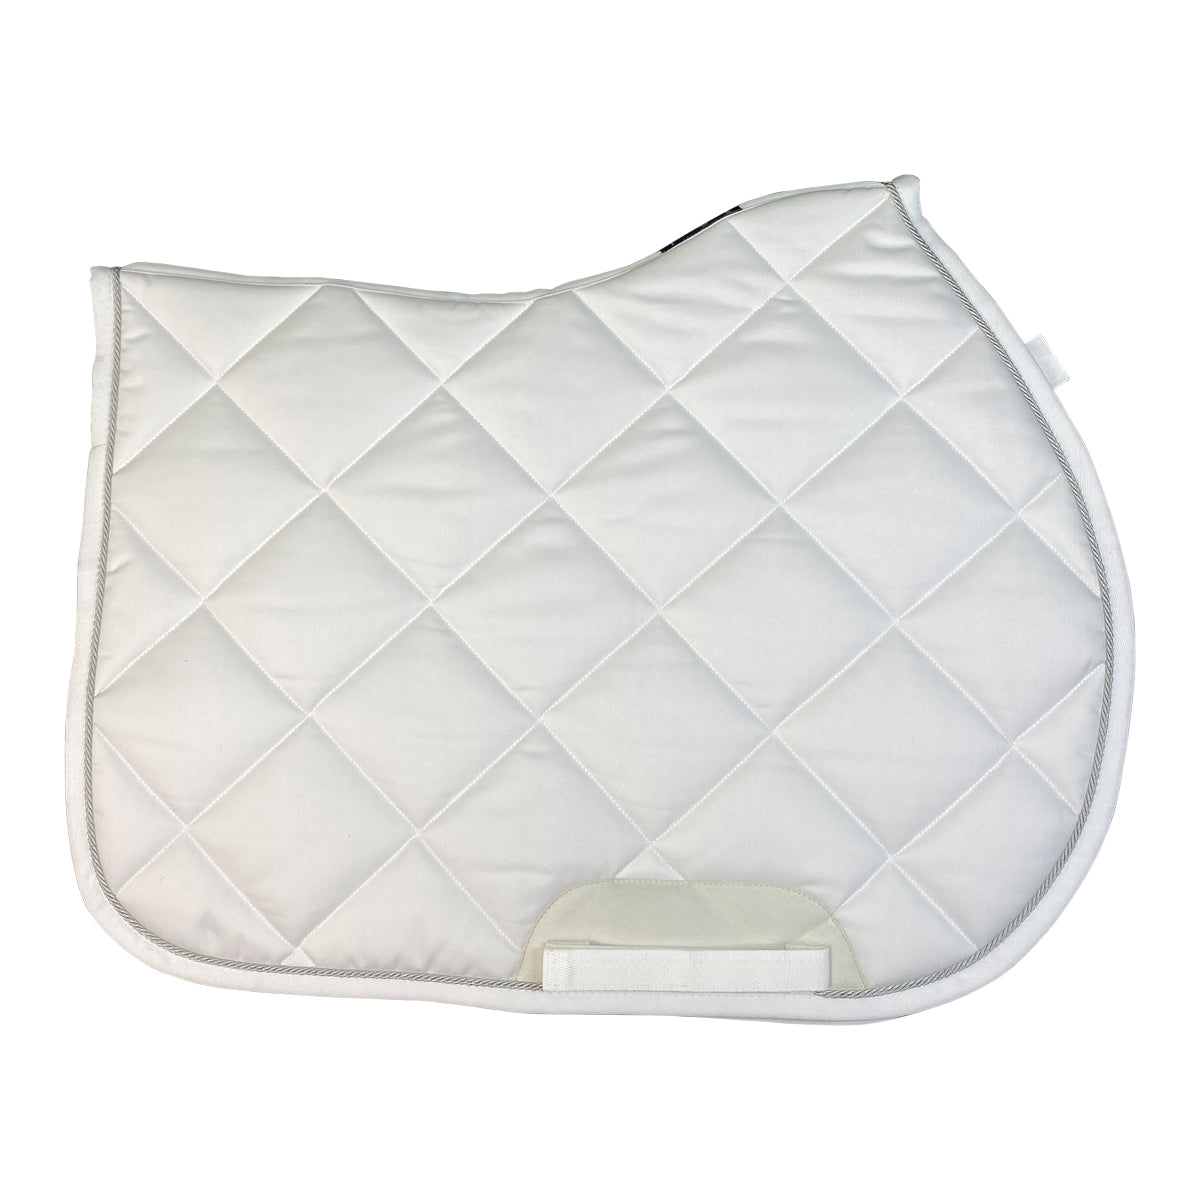 Equiline EGRIT RN 'Rombo' Saddle Pad in White W/ Honeycomb Inserts